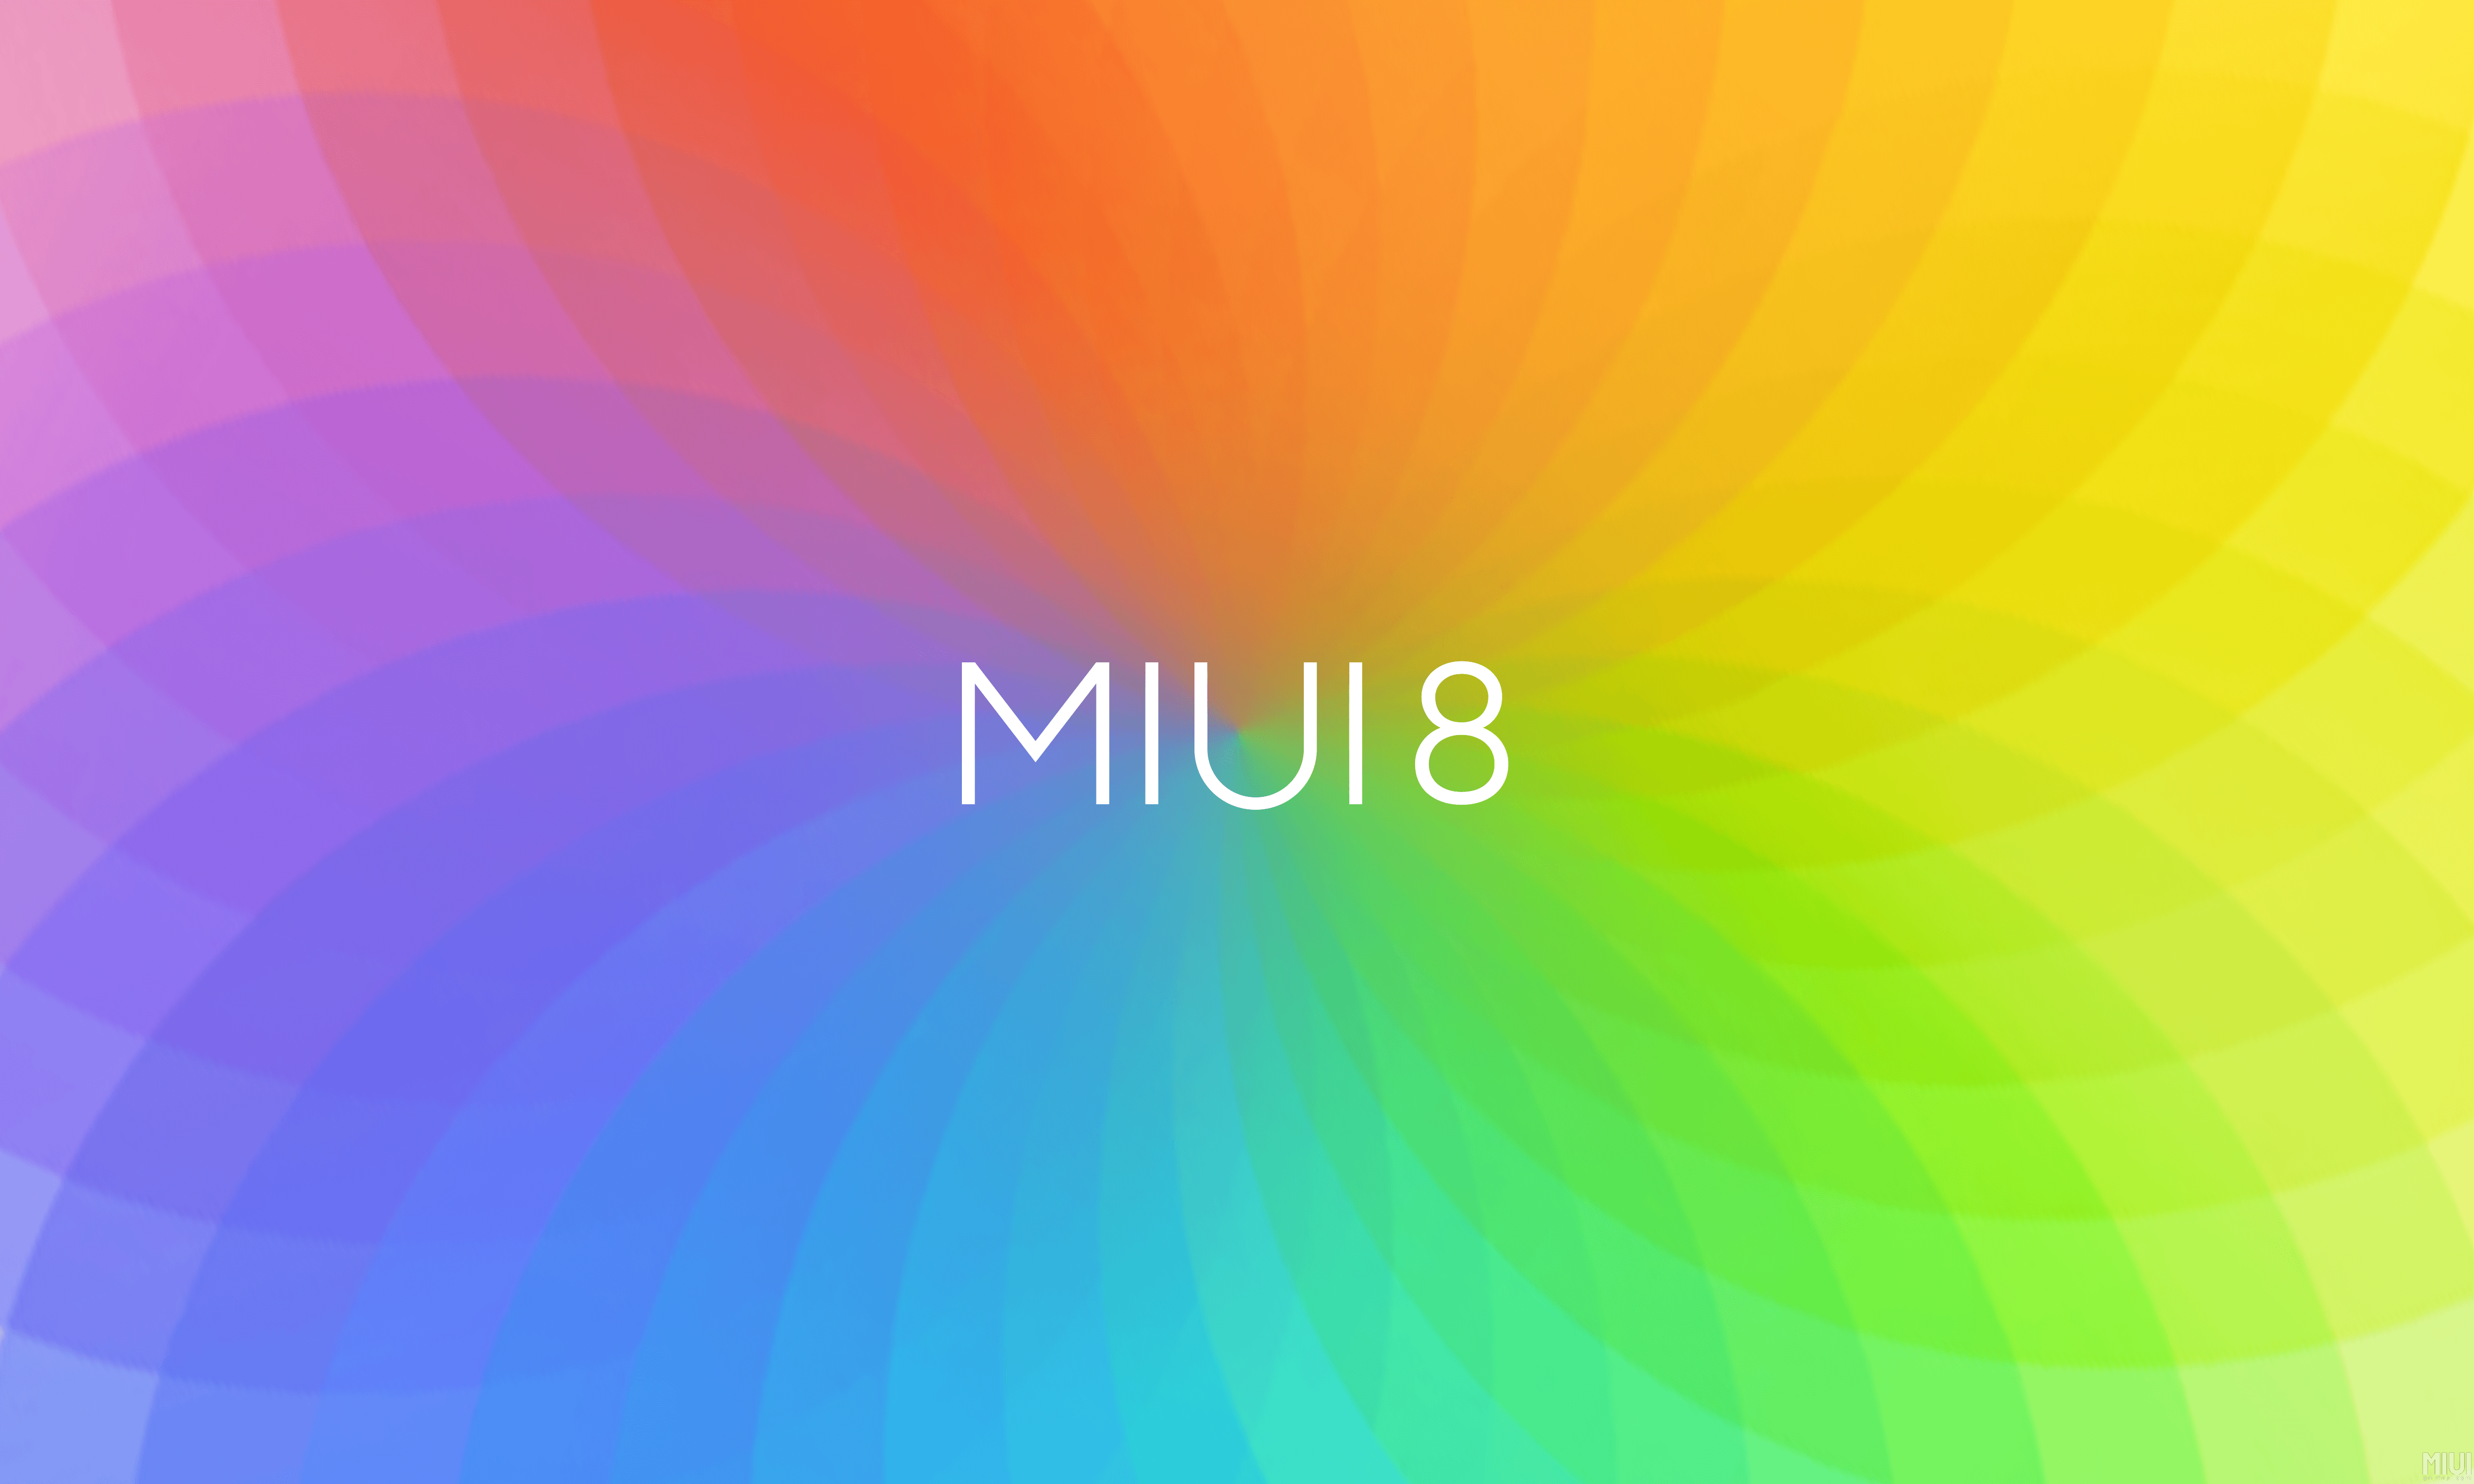 MIUI Stock Wallpaper Collection from MIUI V1 to MIUI 8. Download